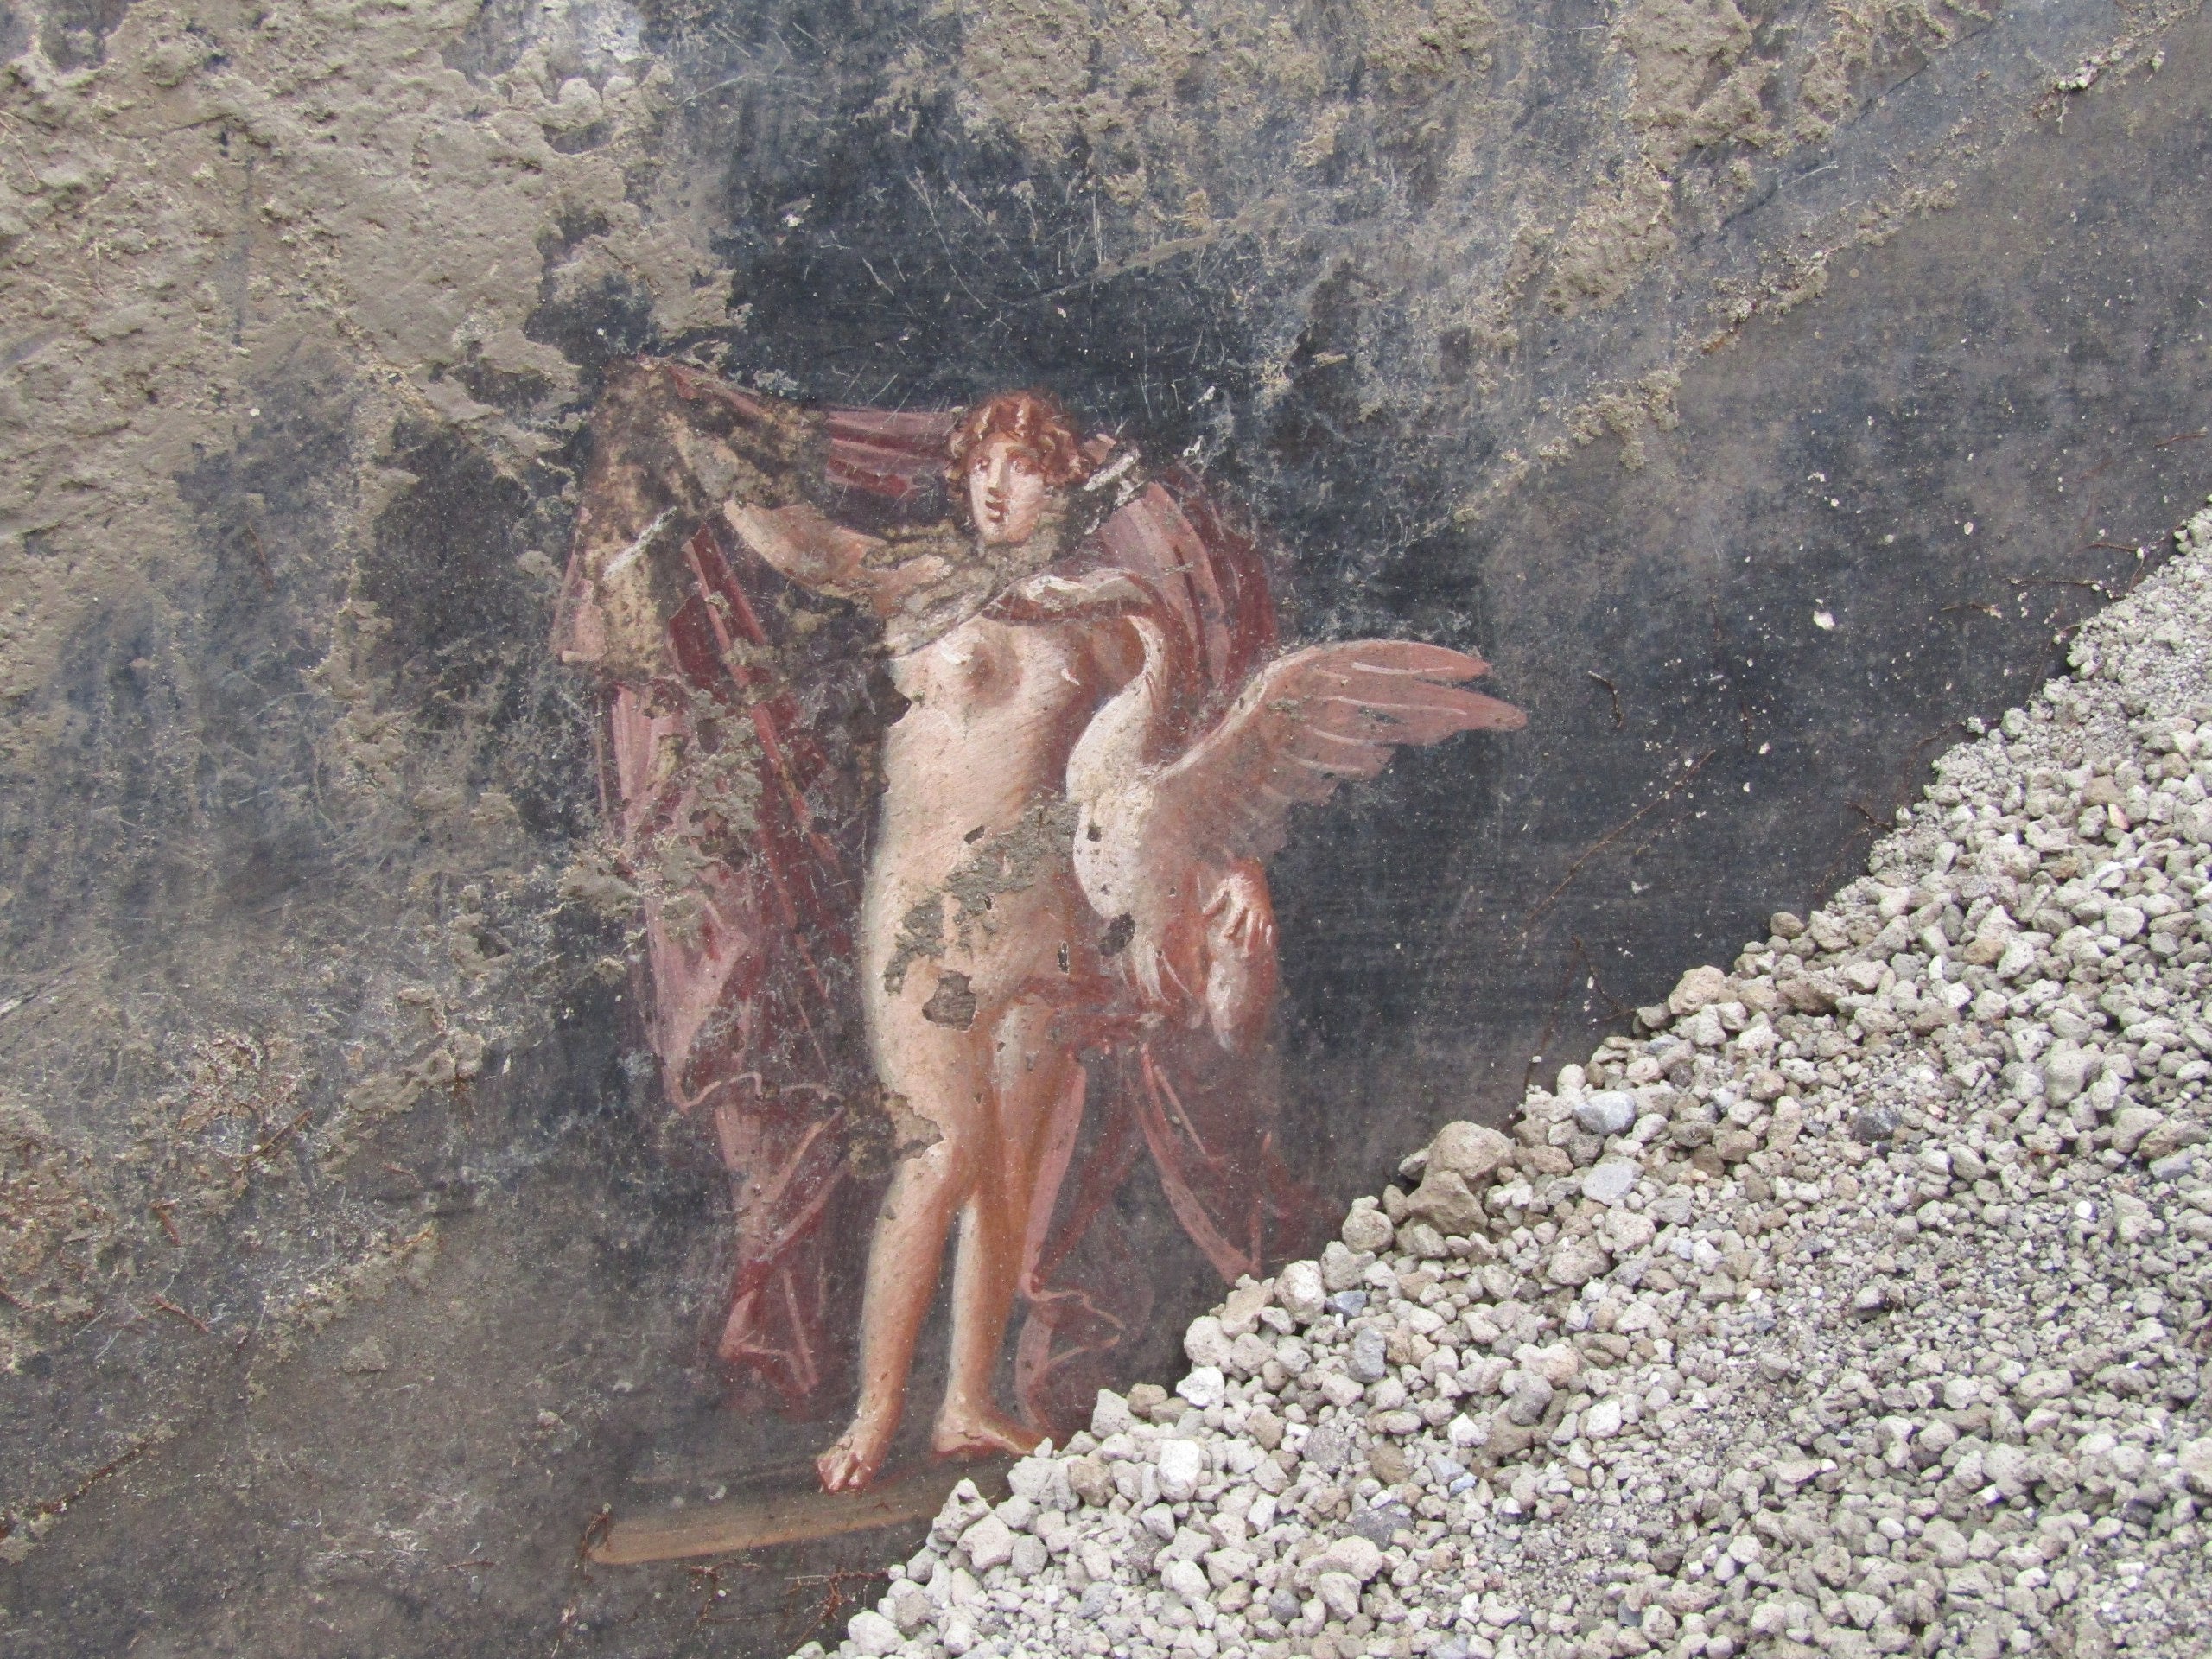 A fresco depicting a mythological creature inspired by the Trojan War